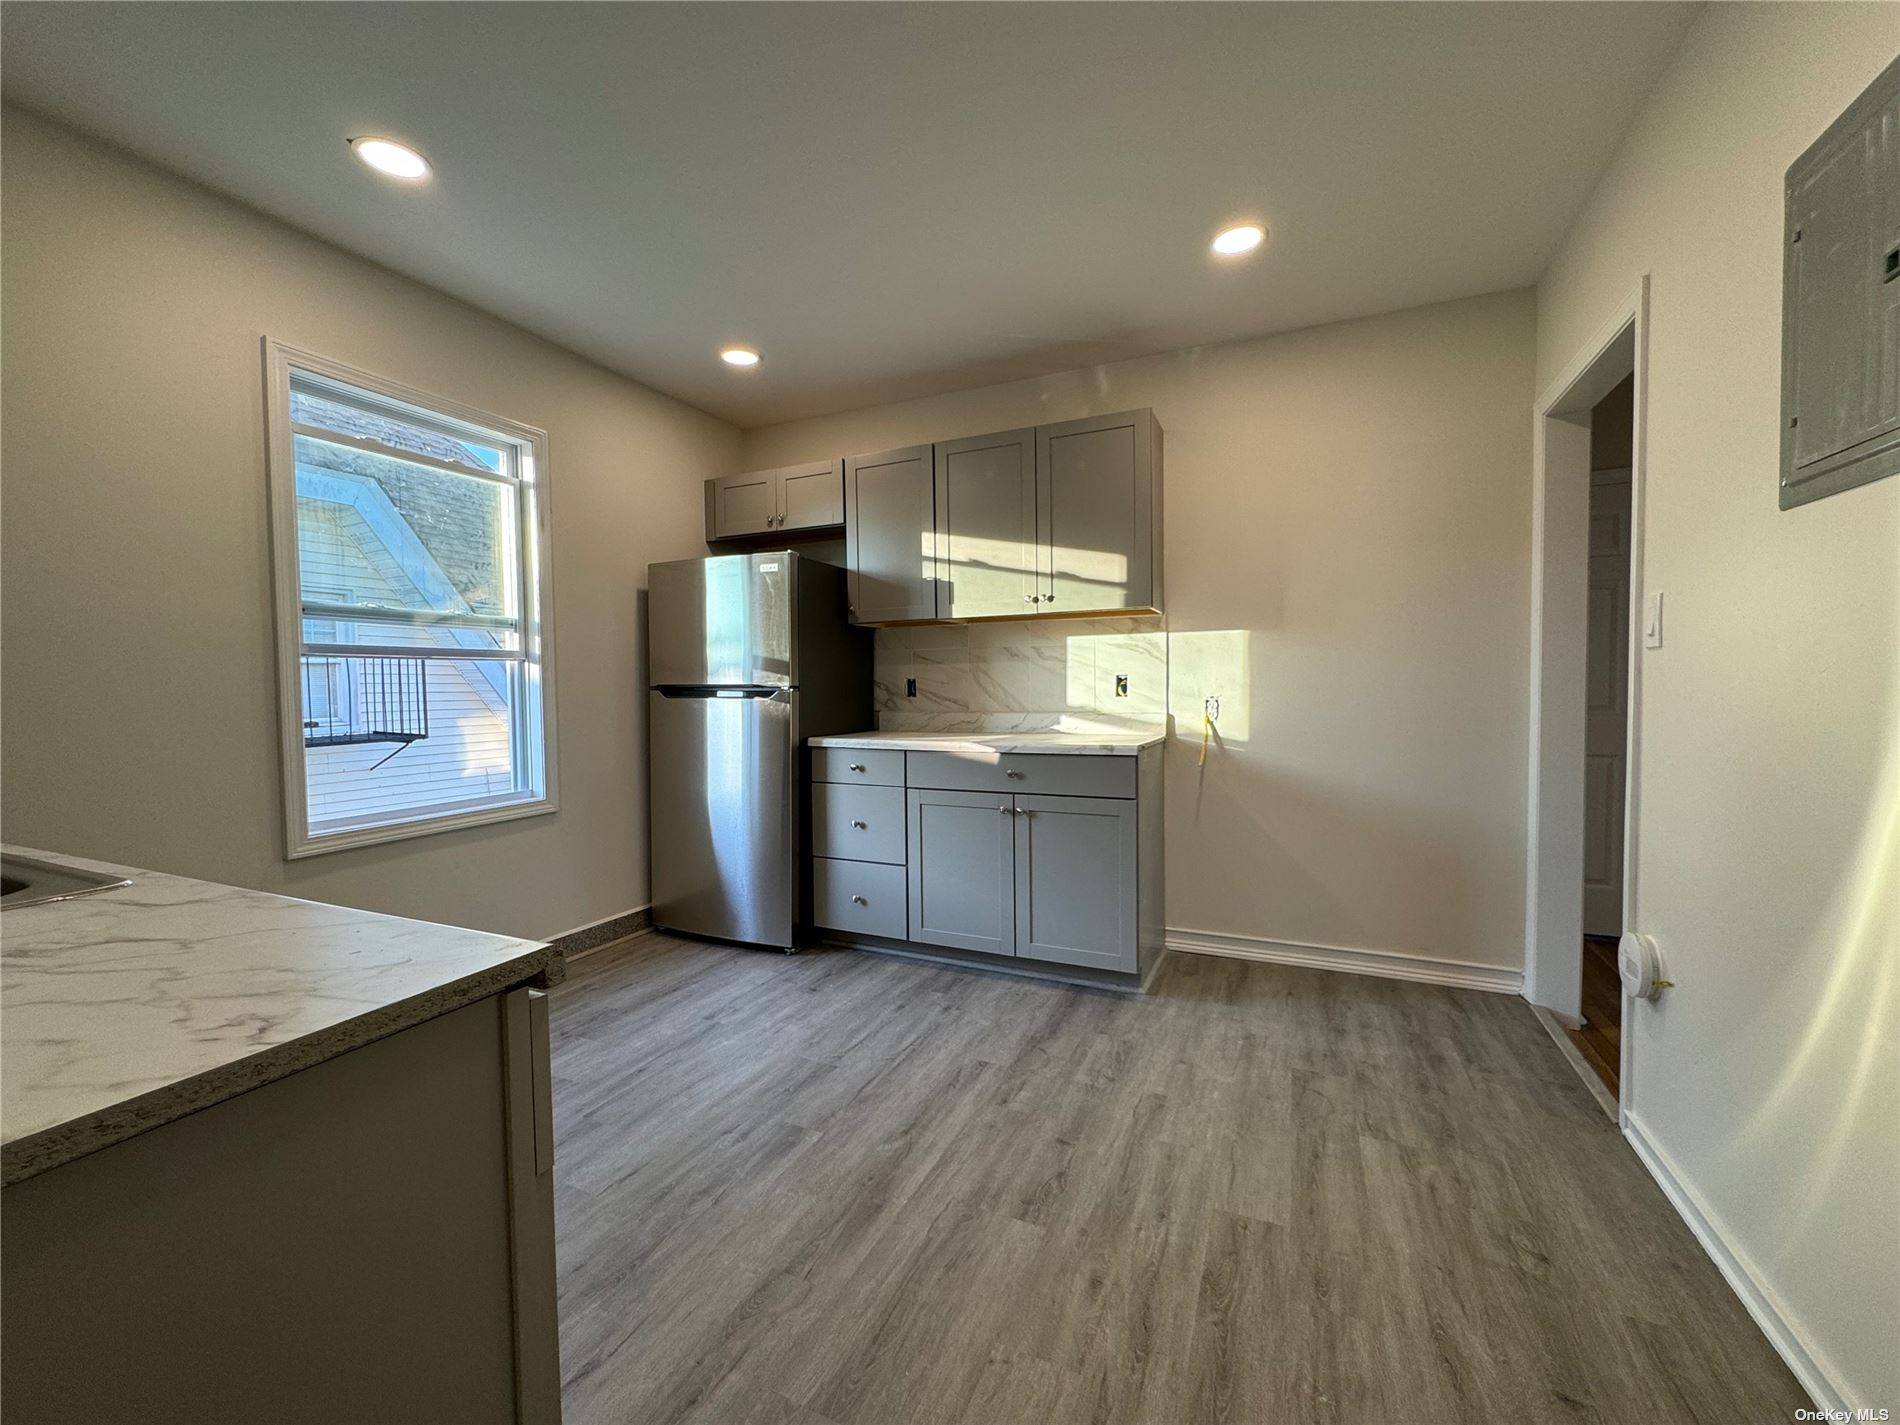 Tons of natural light in this fabulous brand new interior in large 3 bedroom 1 bath with gigantic living room on an upper floor apartment in the heart of N.